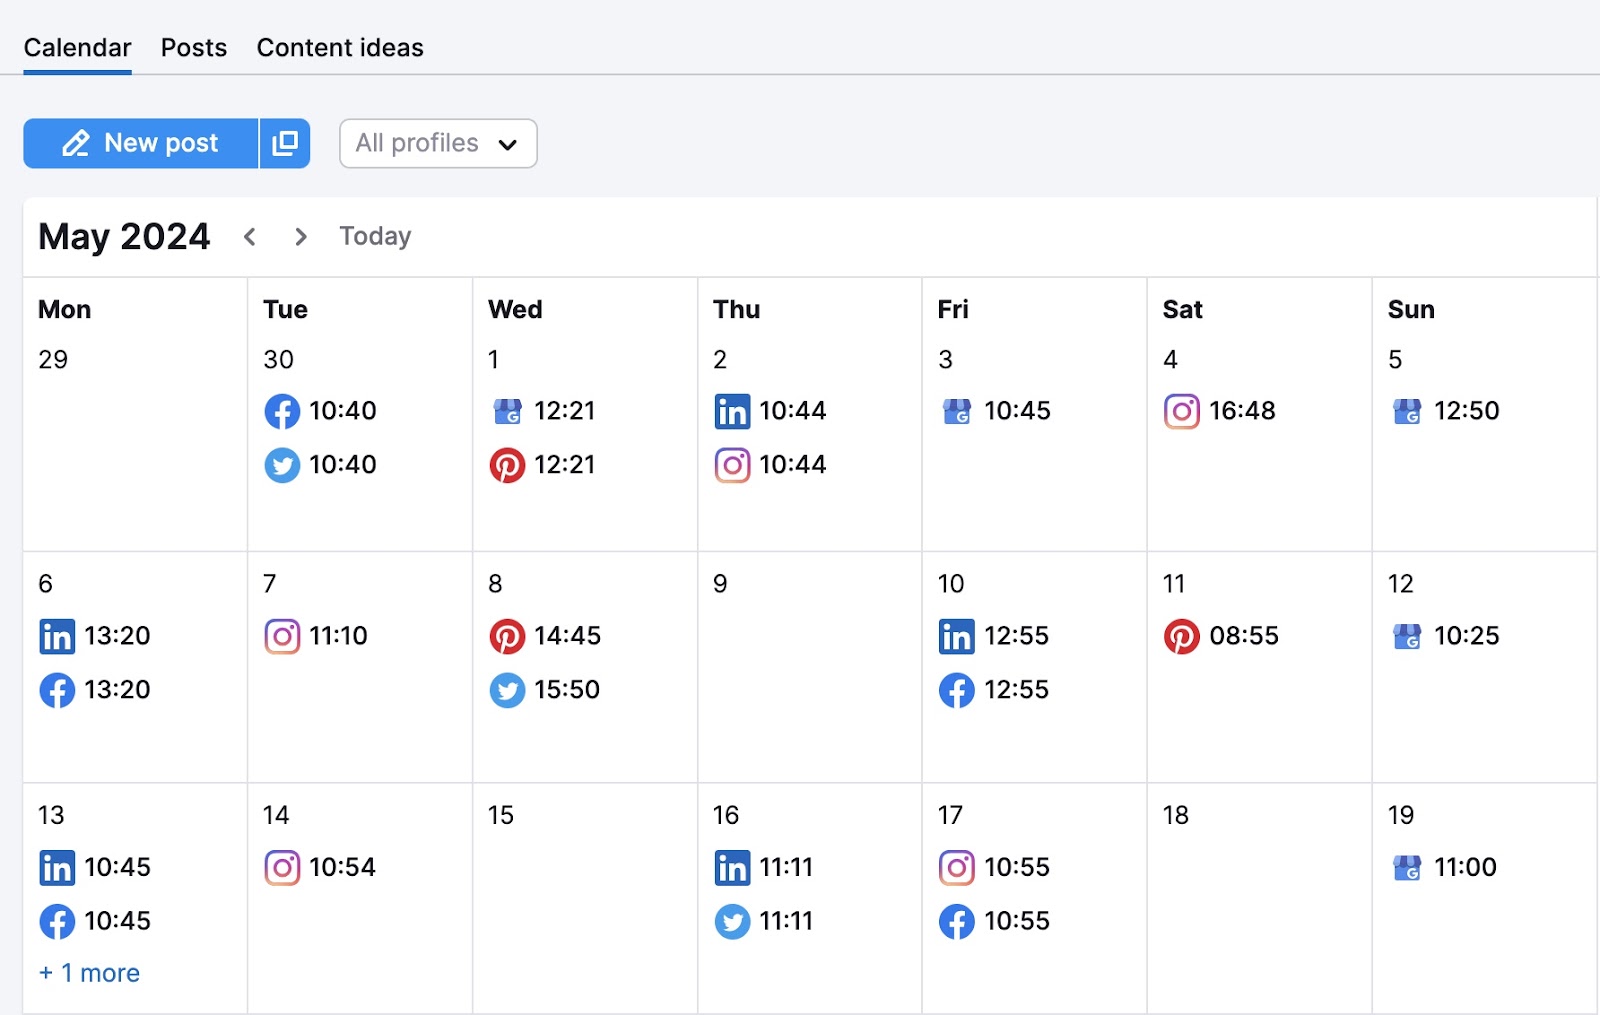 Calendar view on Social poster with posts scheduled for each day of the month across multiple social media platforms.